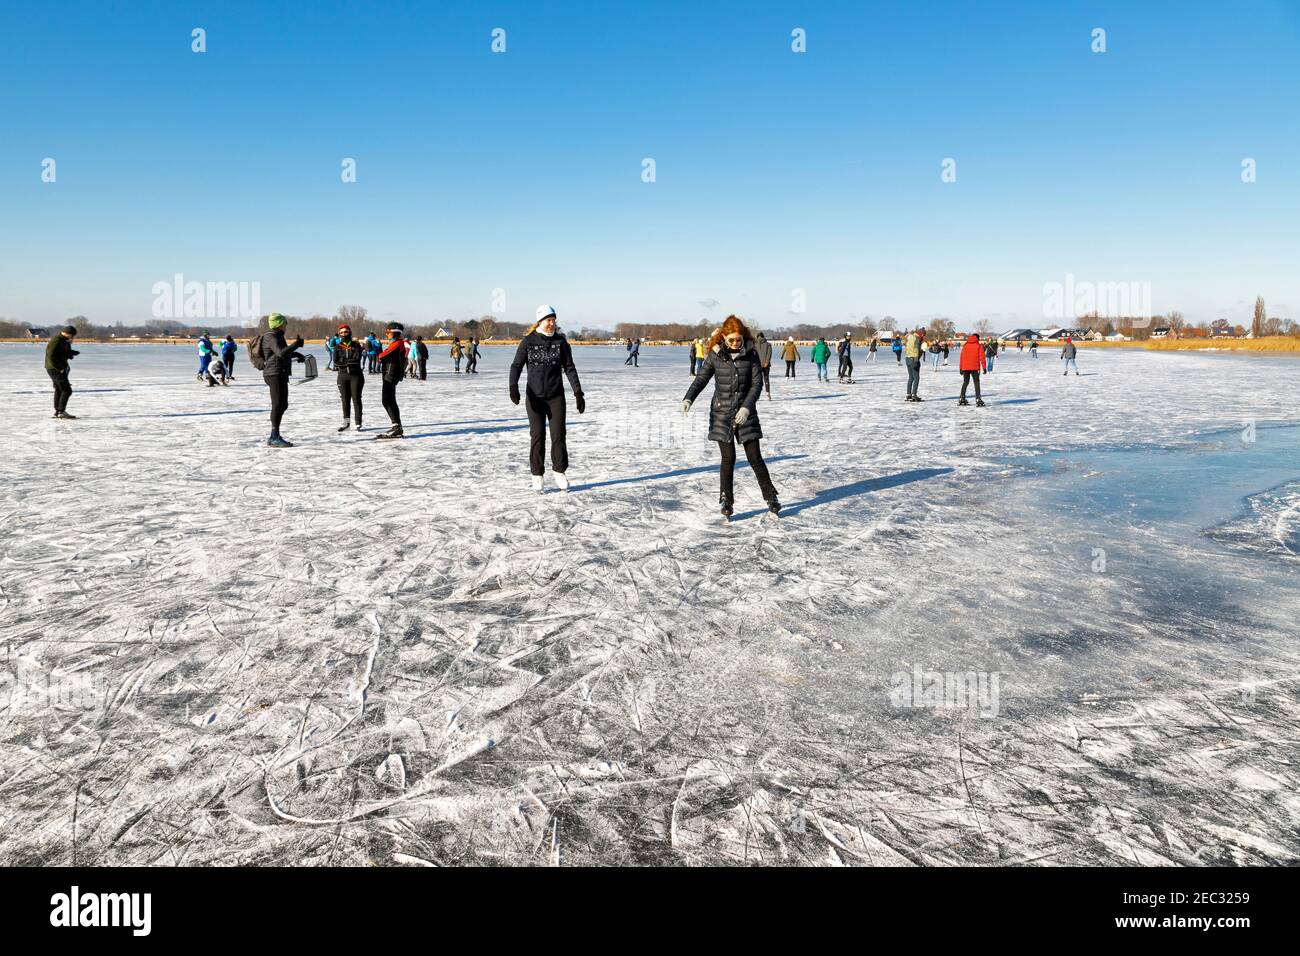 Ice skating on Vogelplas Starrevaart, a lake in a polder at Leidschendam, in South Holland. the Netherlands Stock Photo